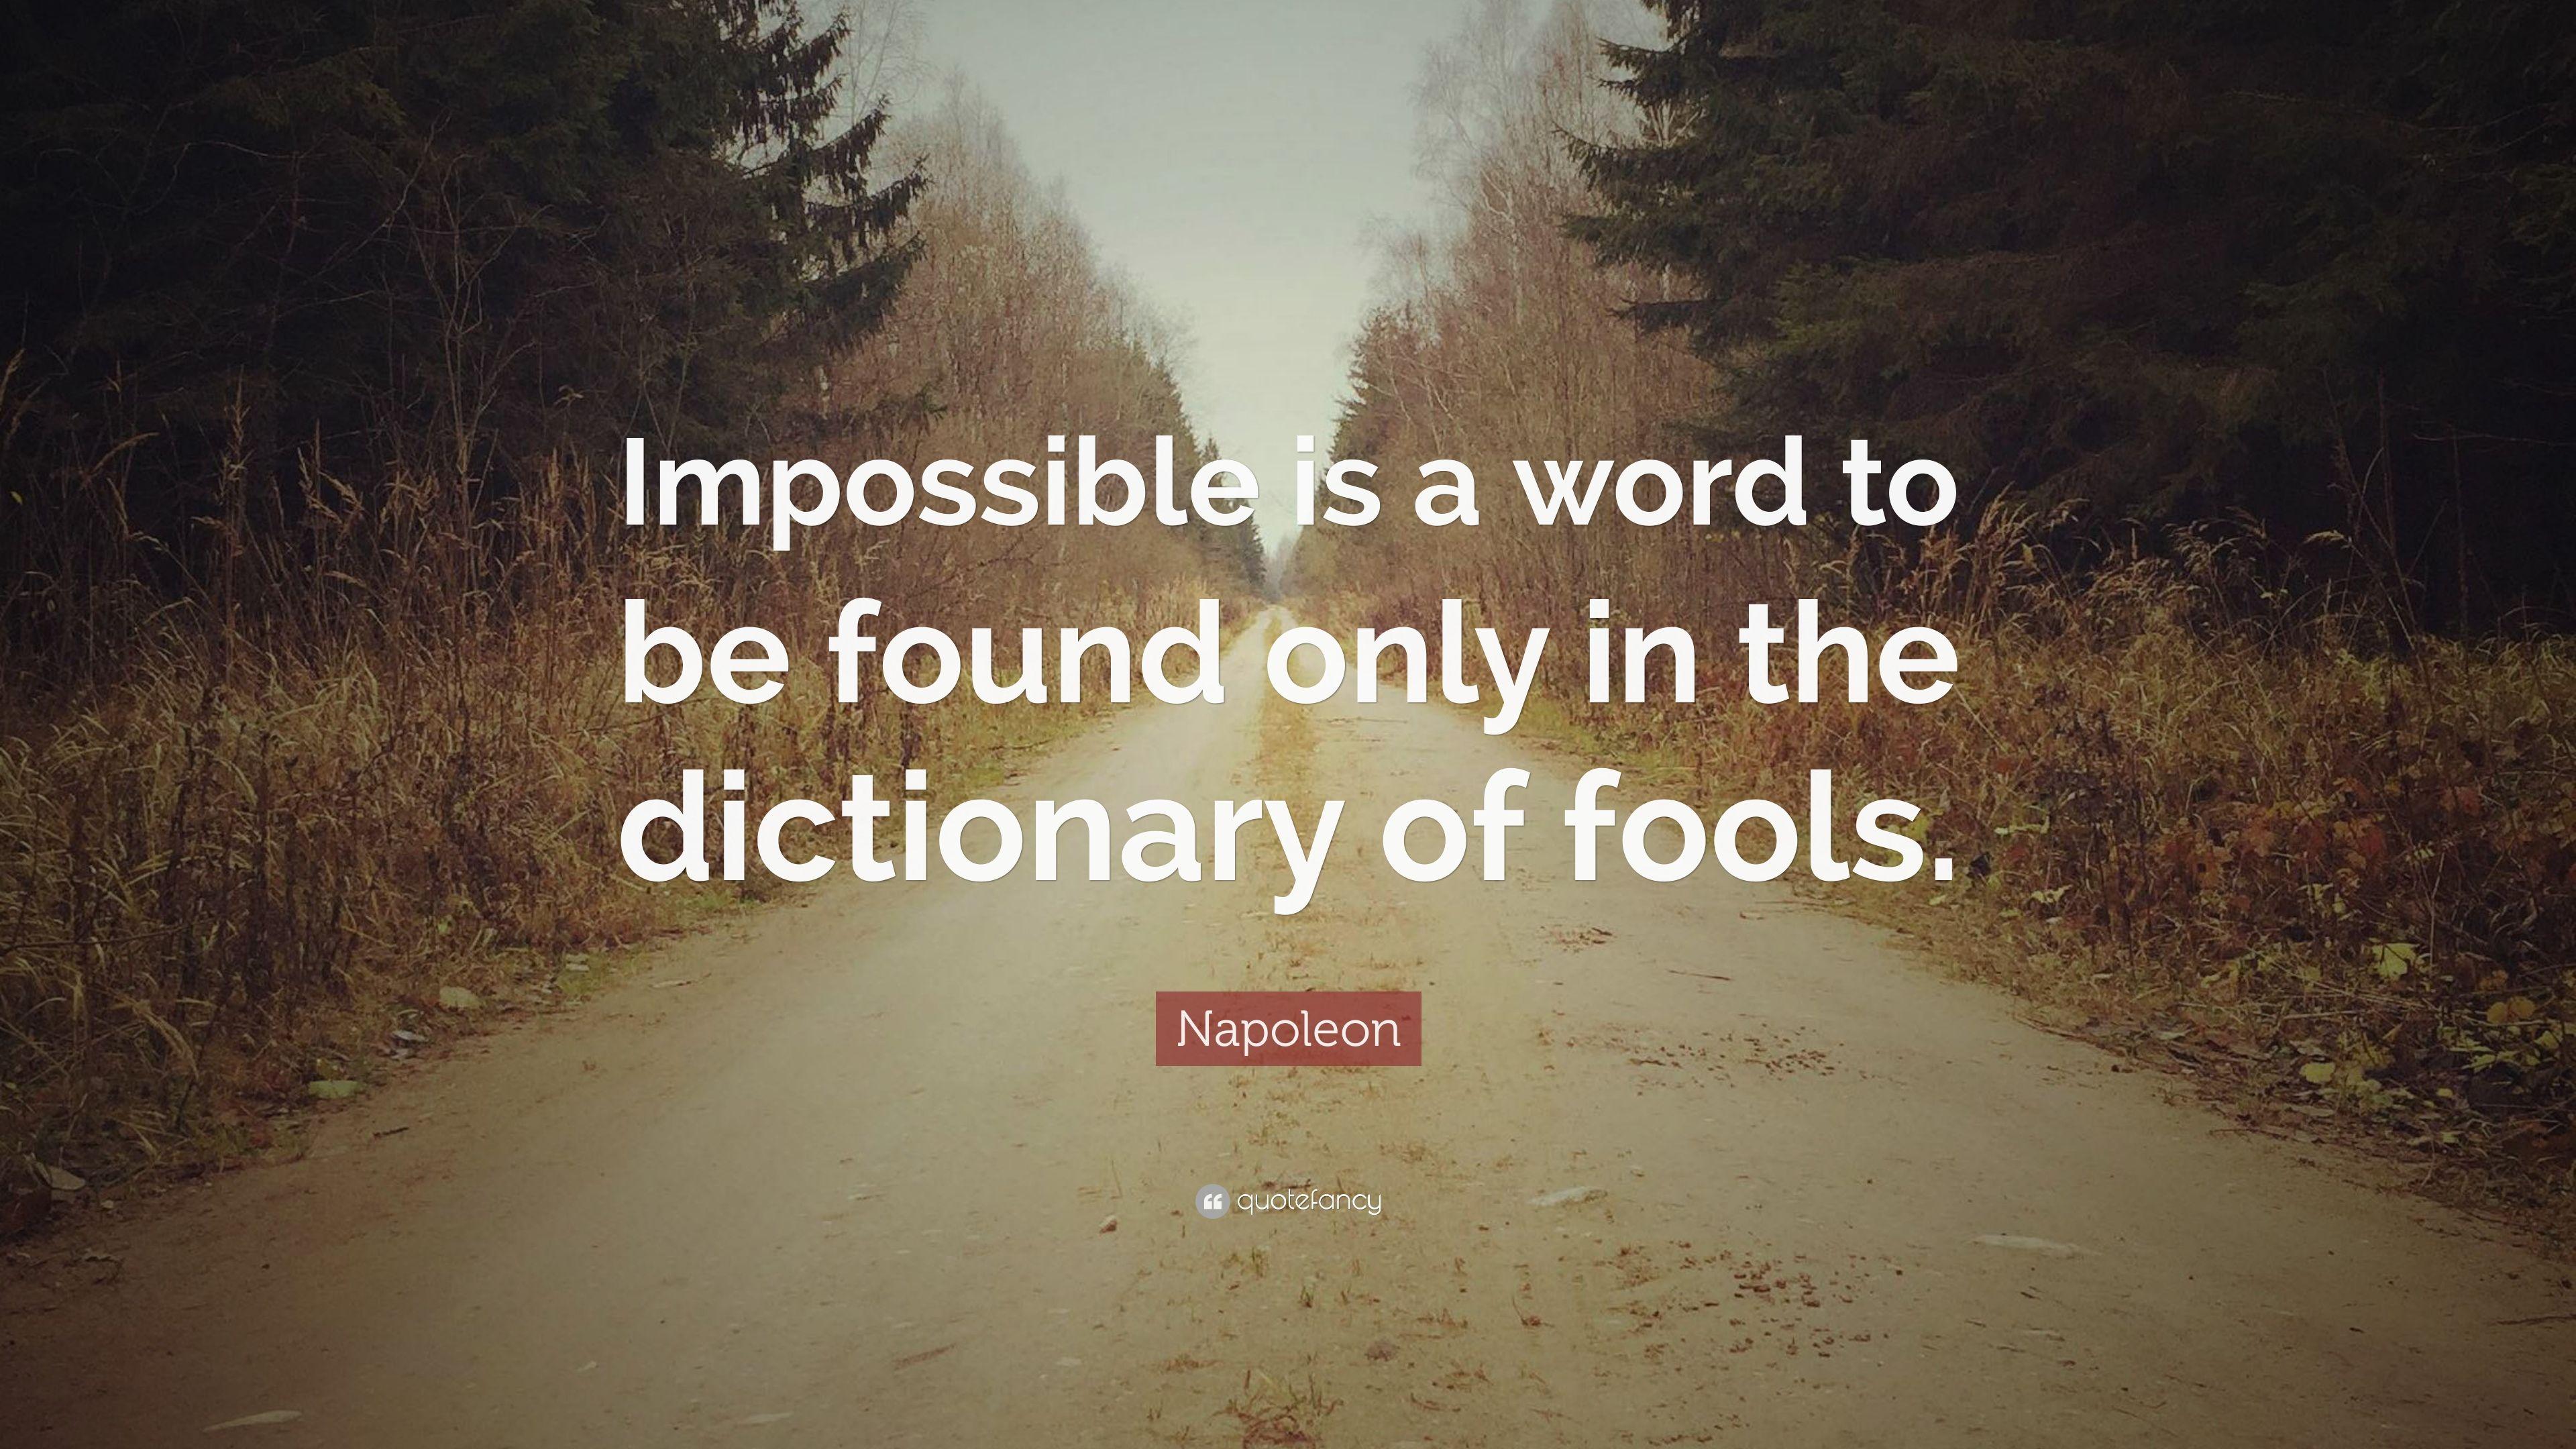 Napoleon Quote: “Impossible is a word to be found only in